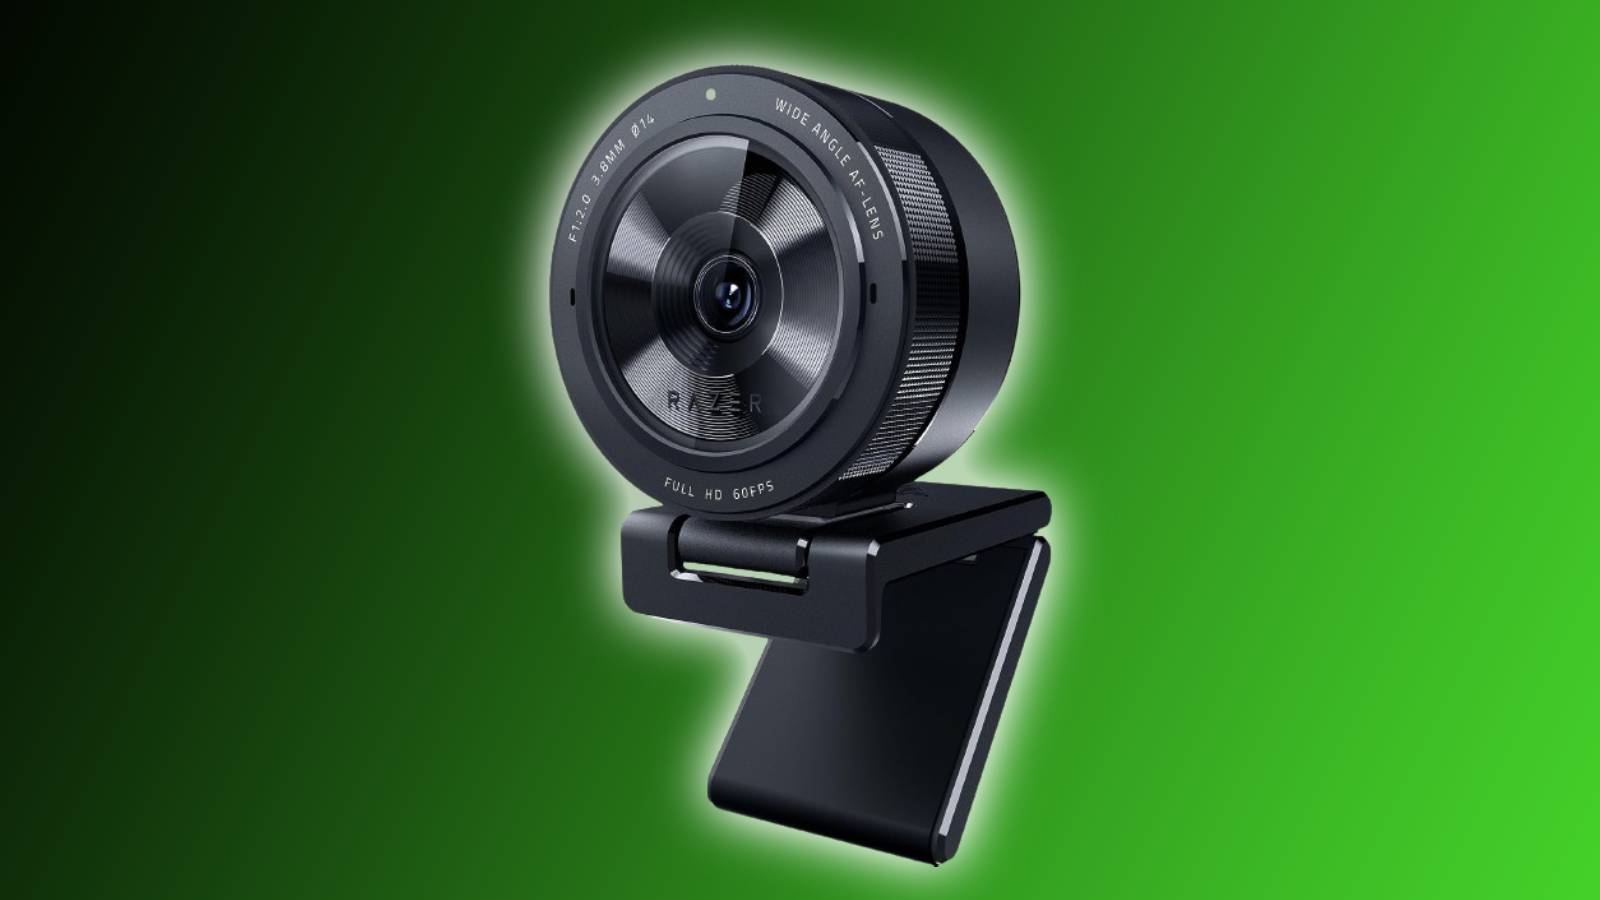 Razer Kiyo Pro webcam improves its image for game streamers and